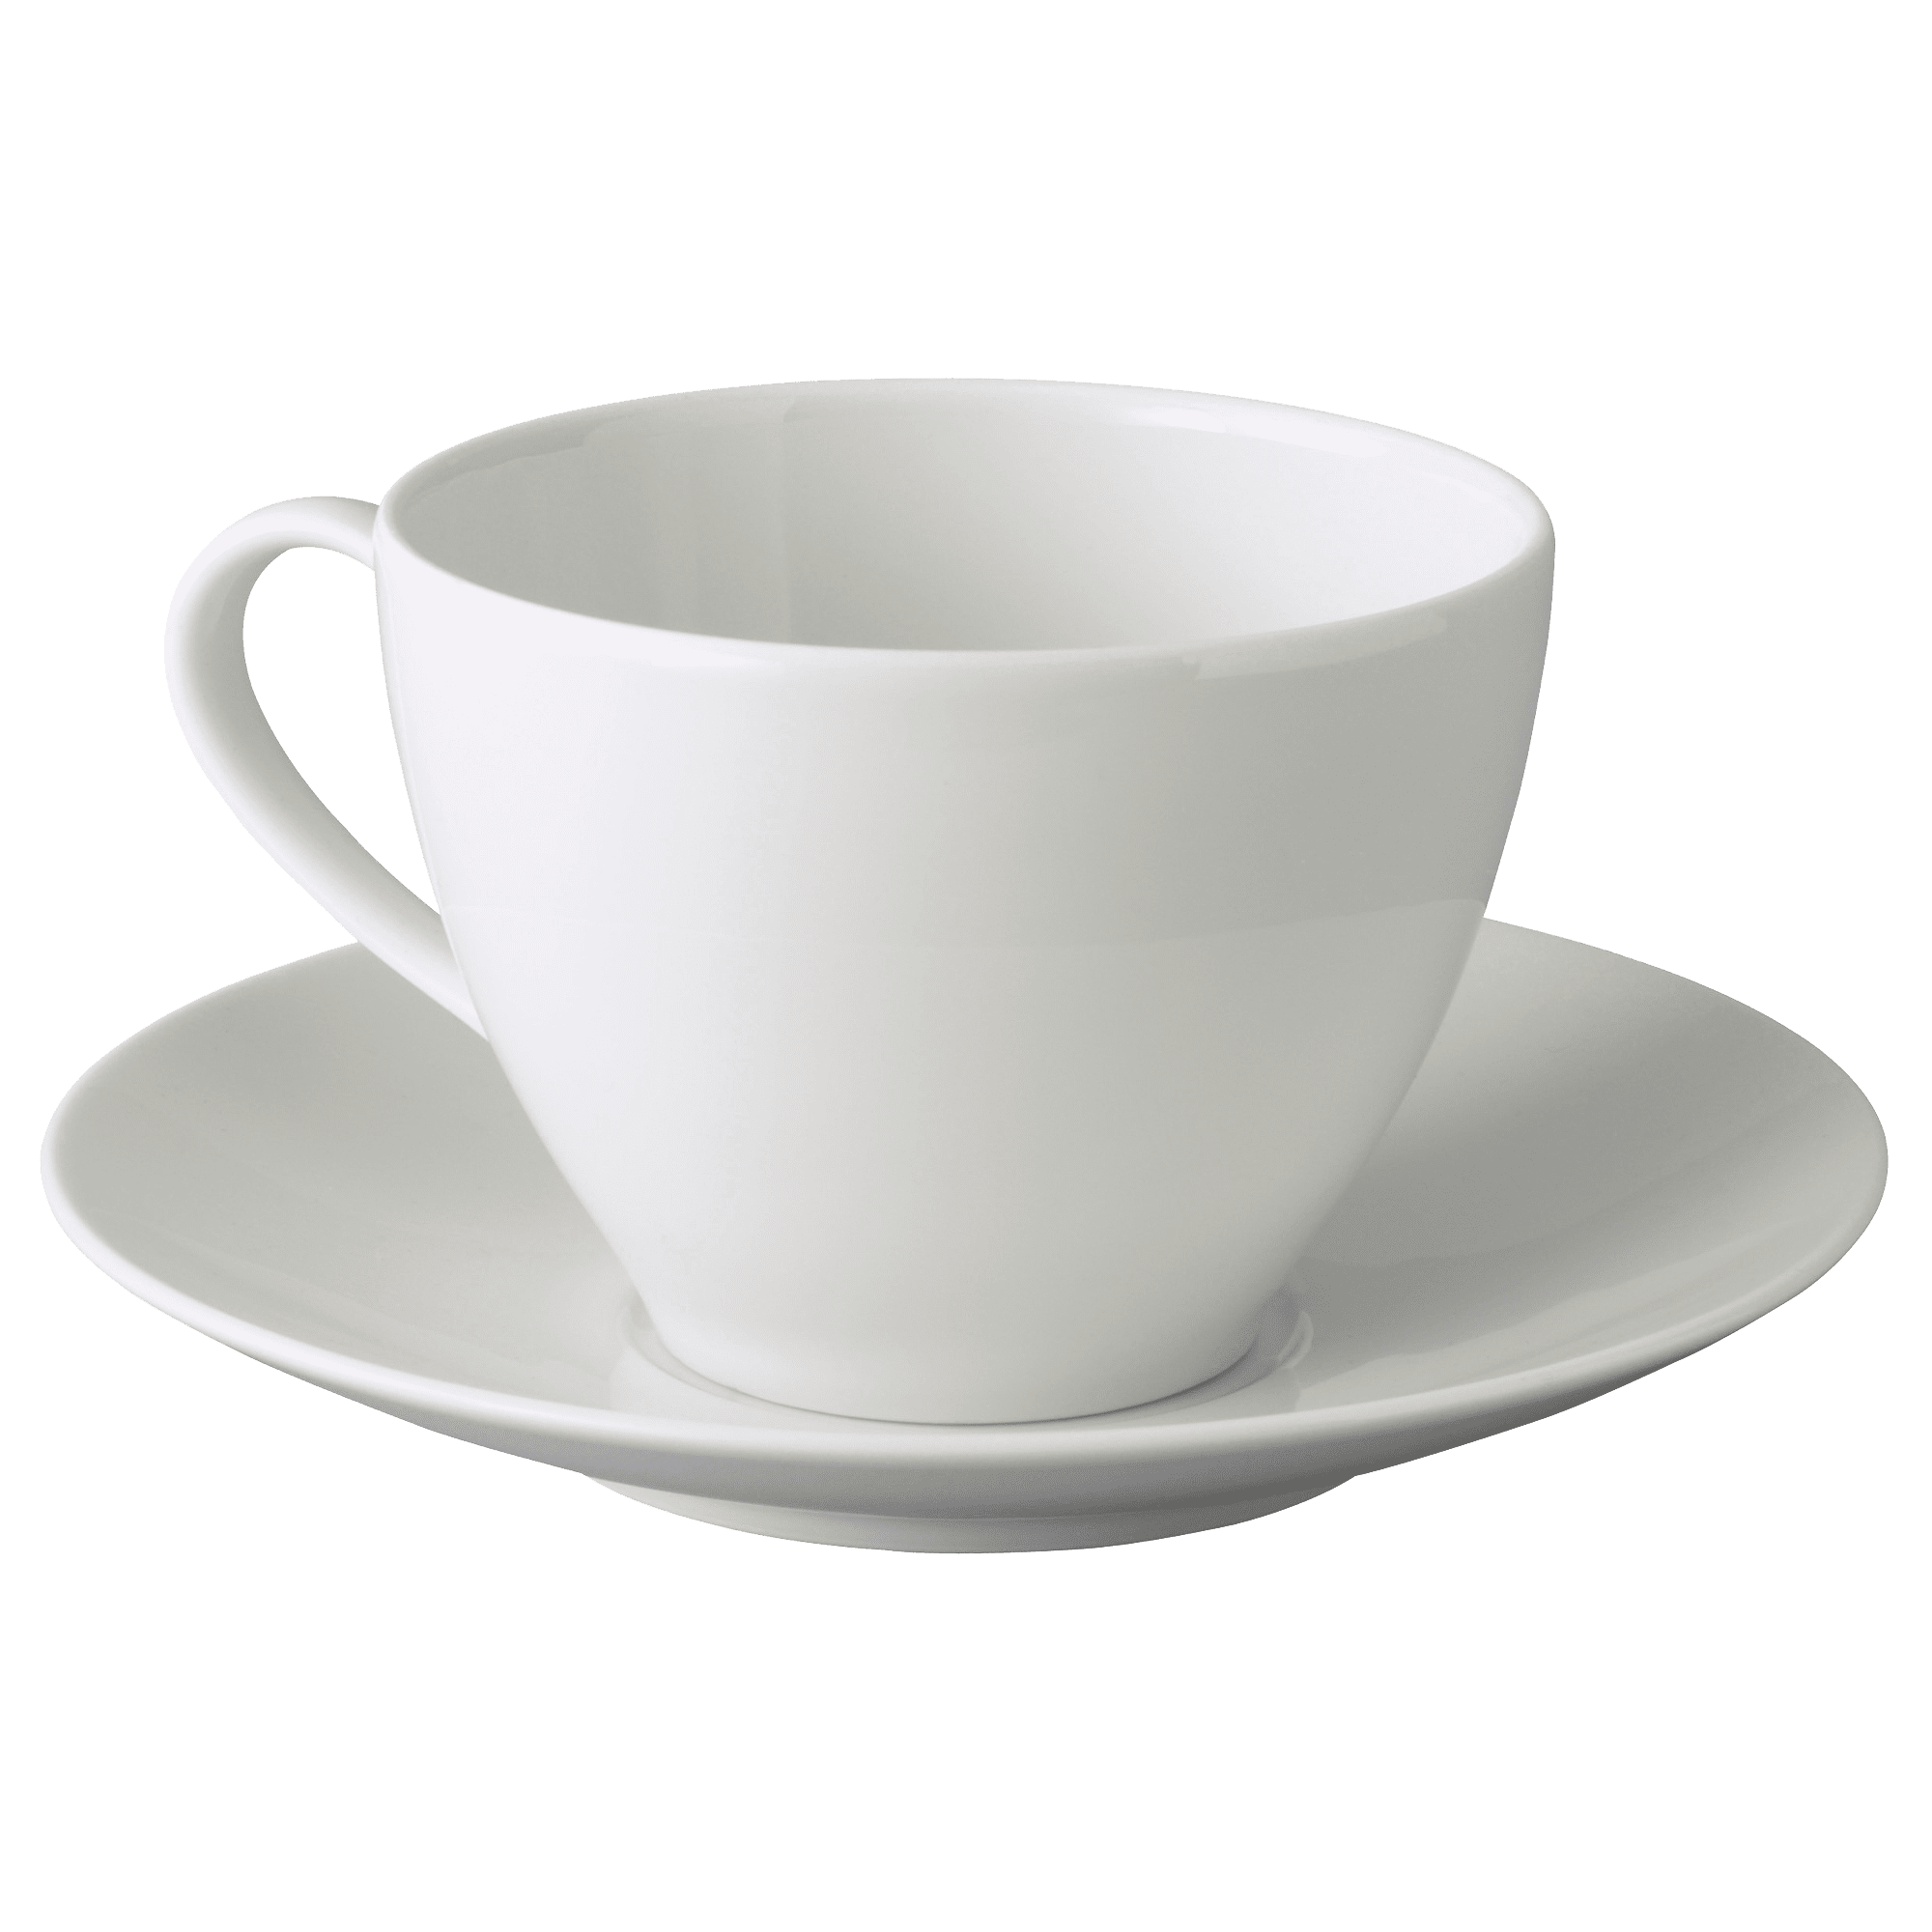 Cup PNG Transparent Images PNG All